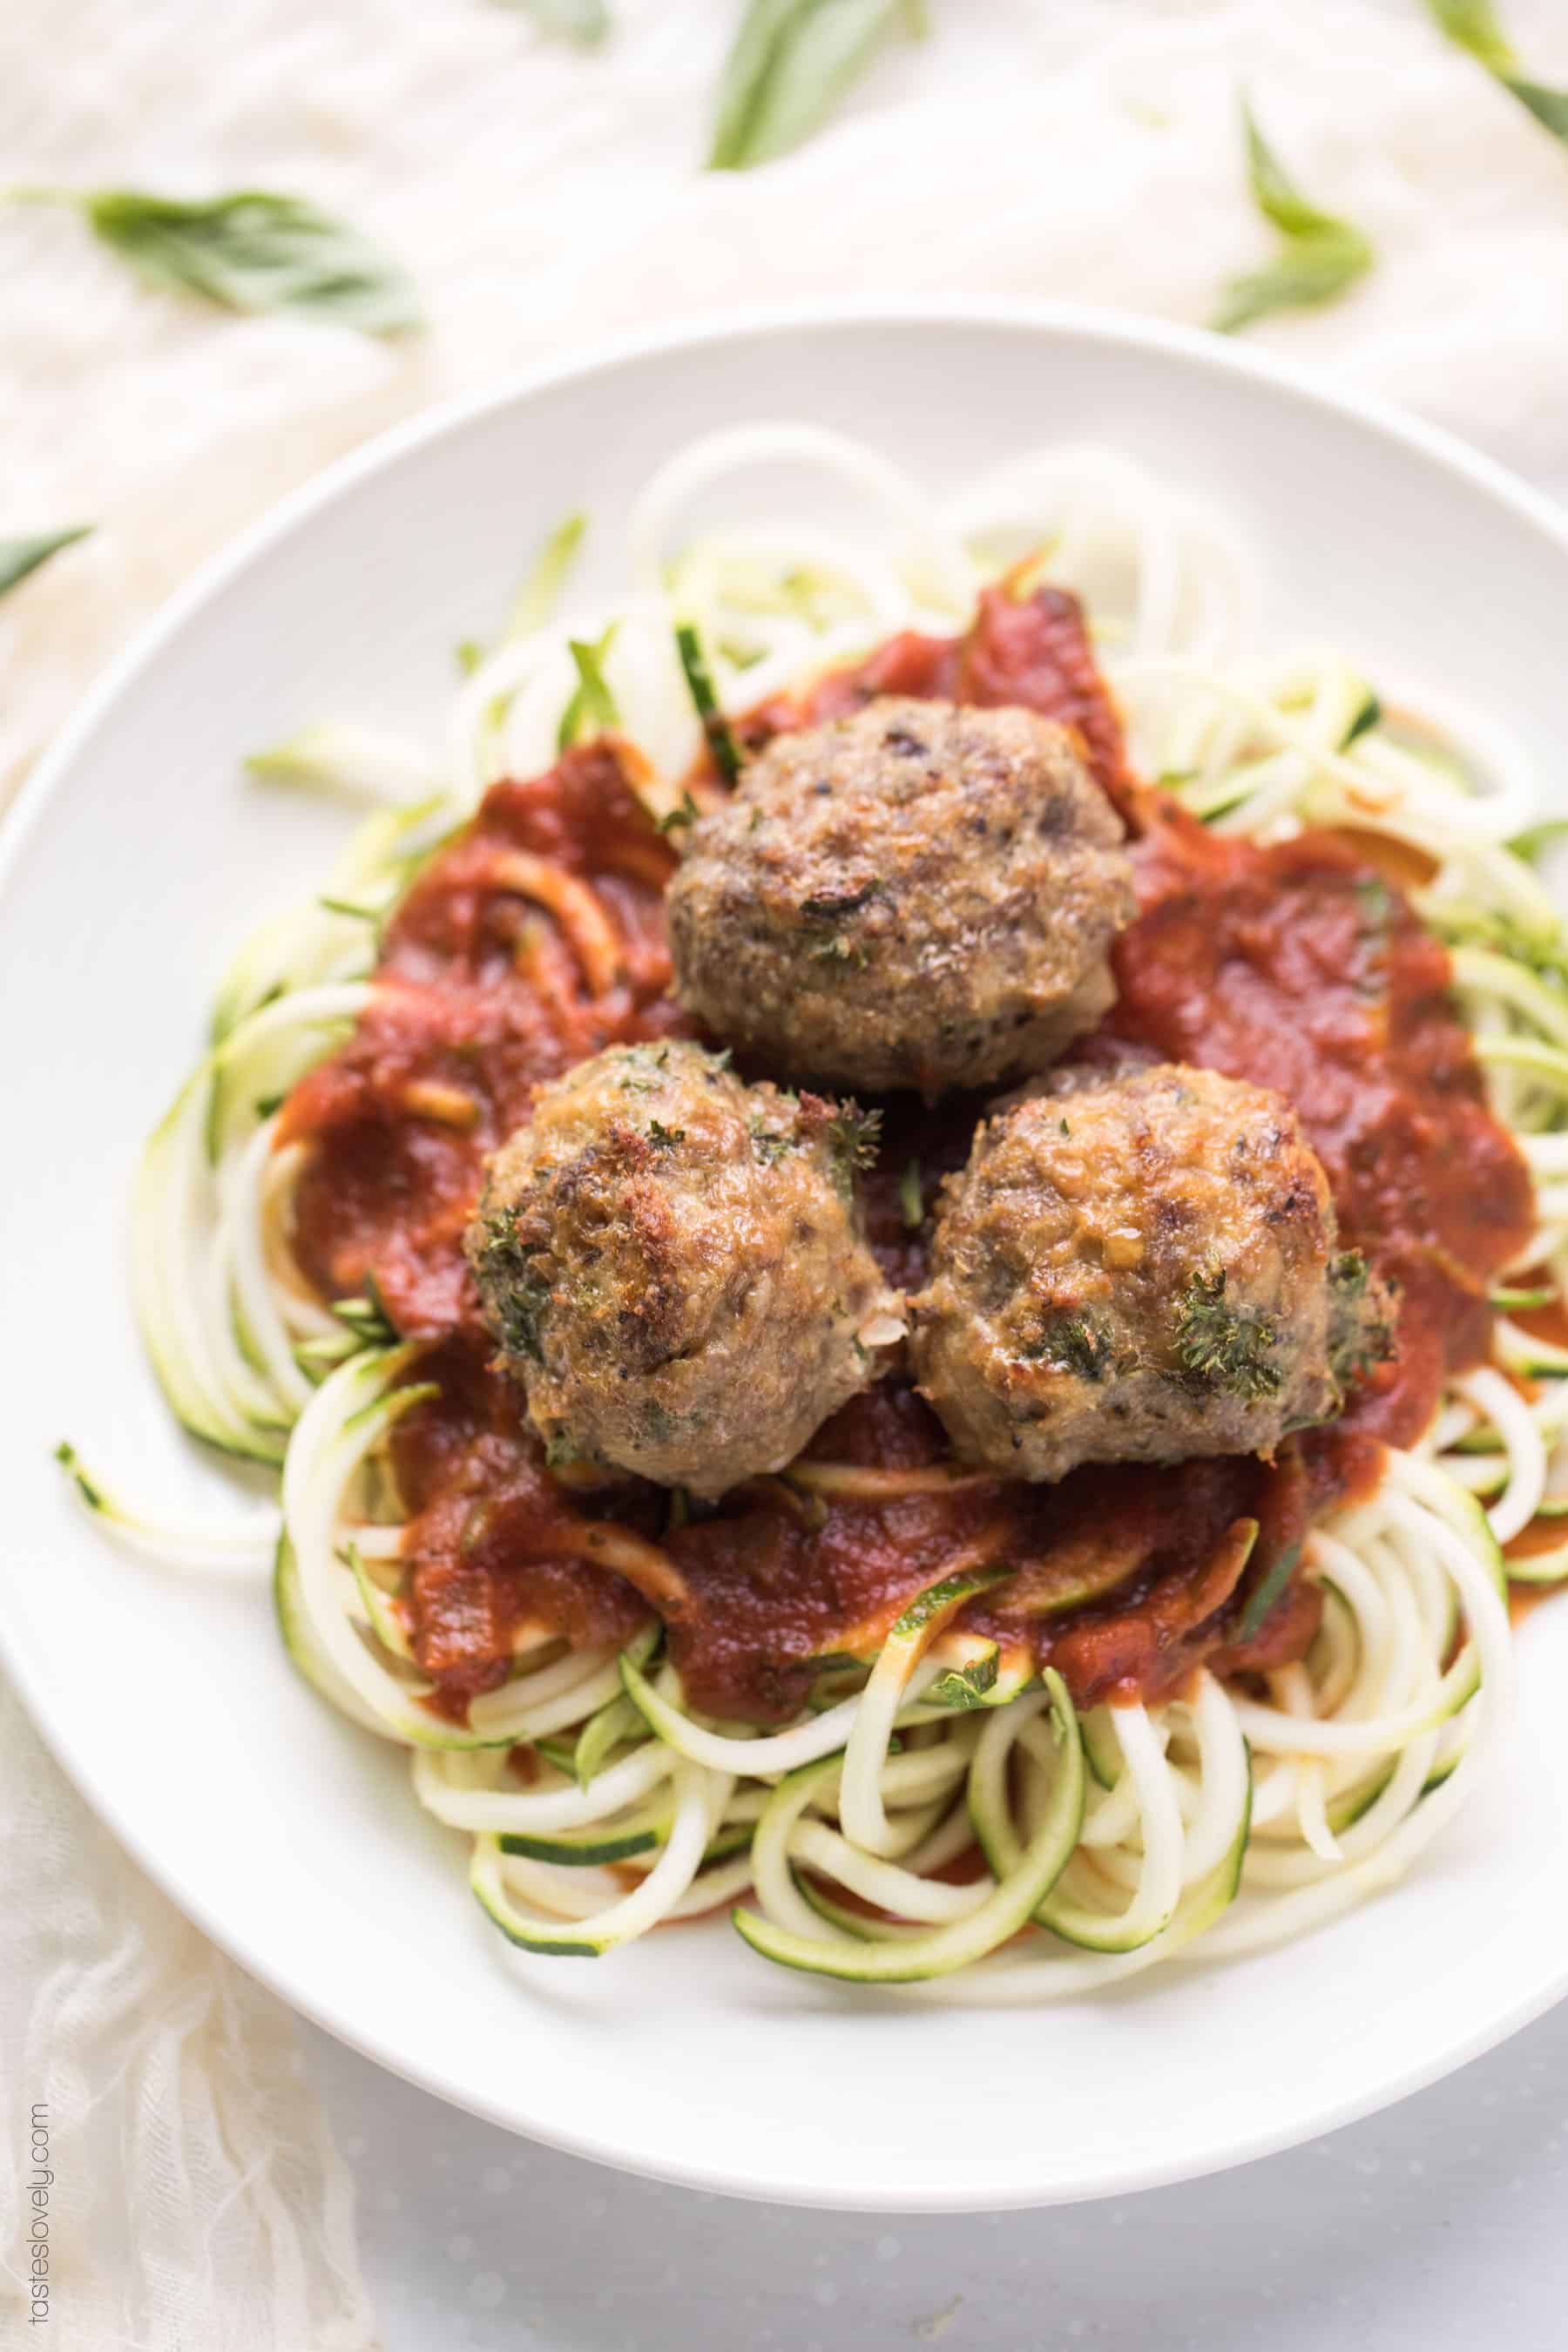 meatballs on a plate with zucchini noodles